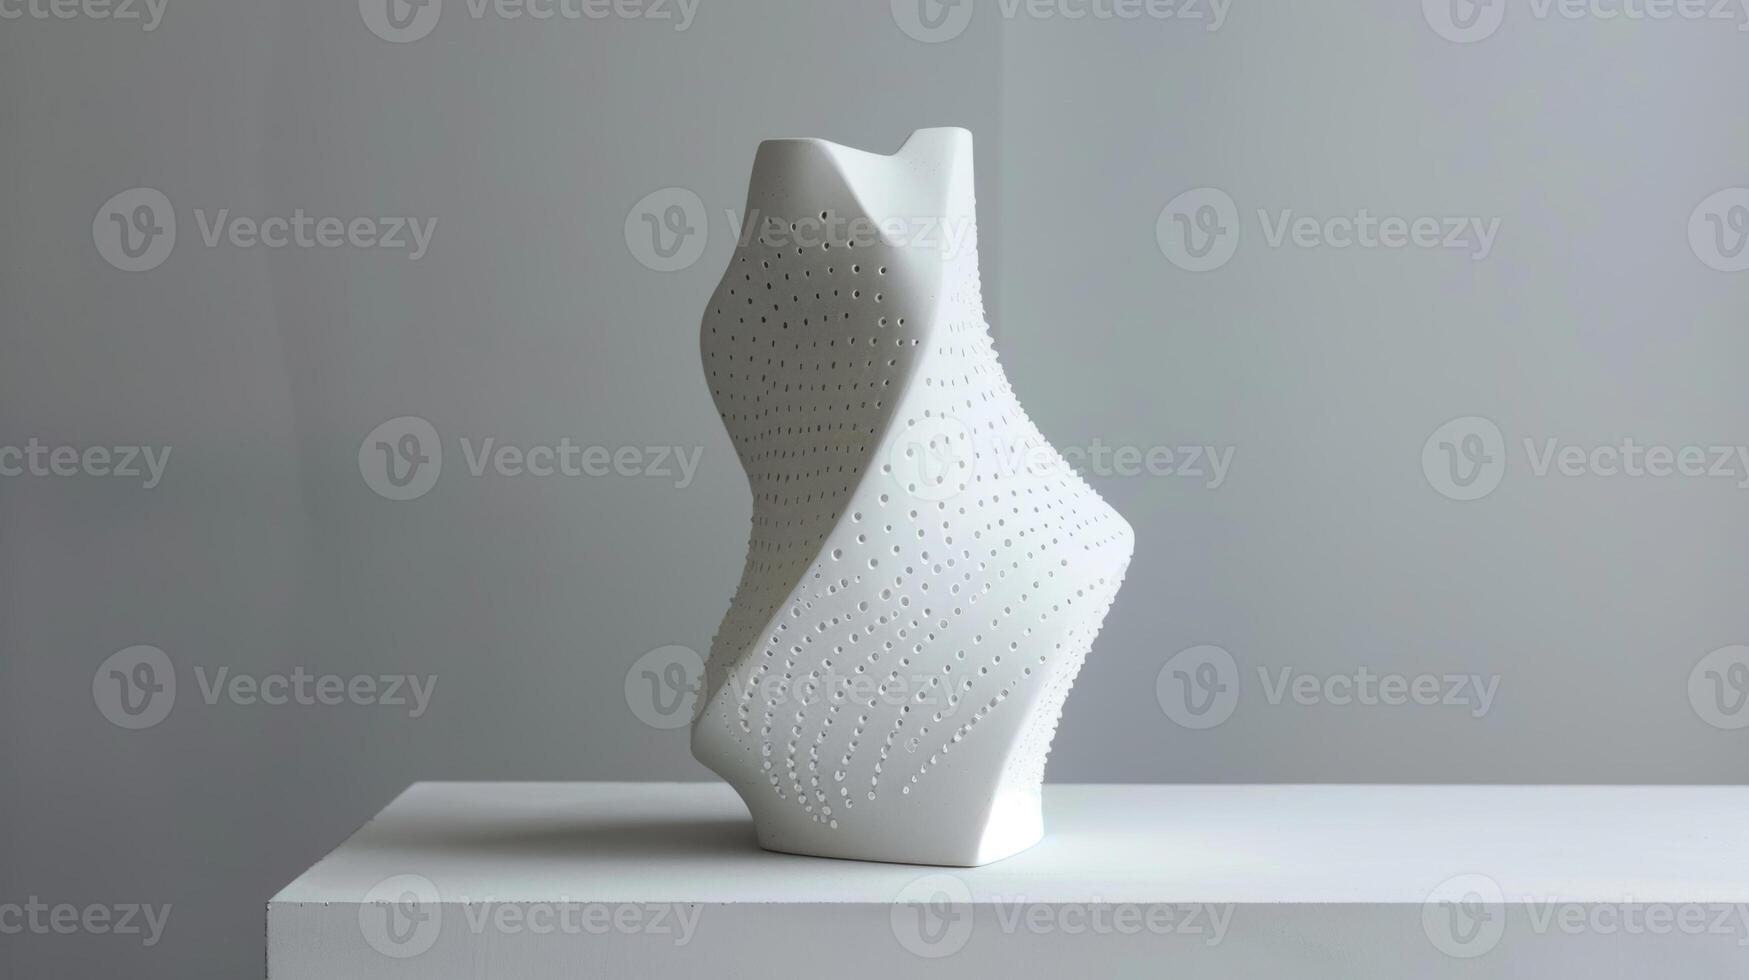 A unique vase in a geometric shape coated in a matte finish with small raised dots creating a playful and tactile surface. photo